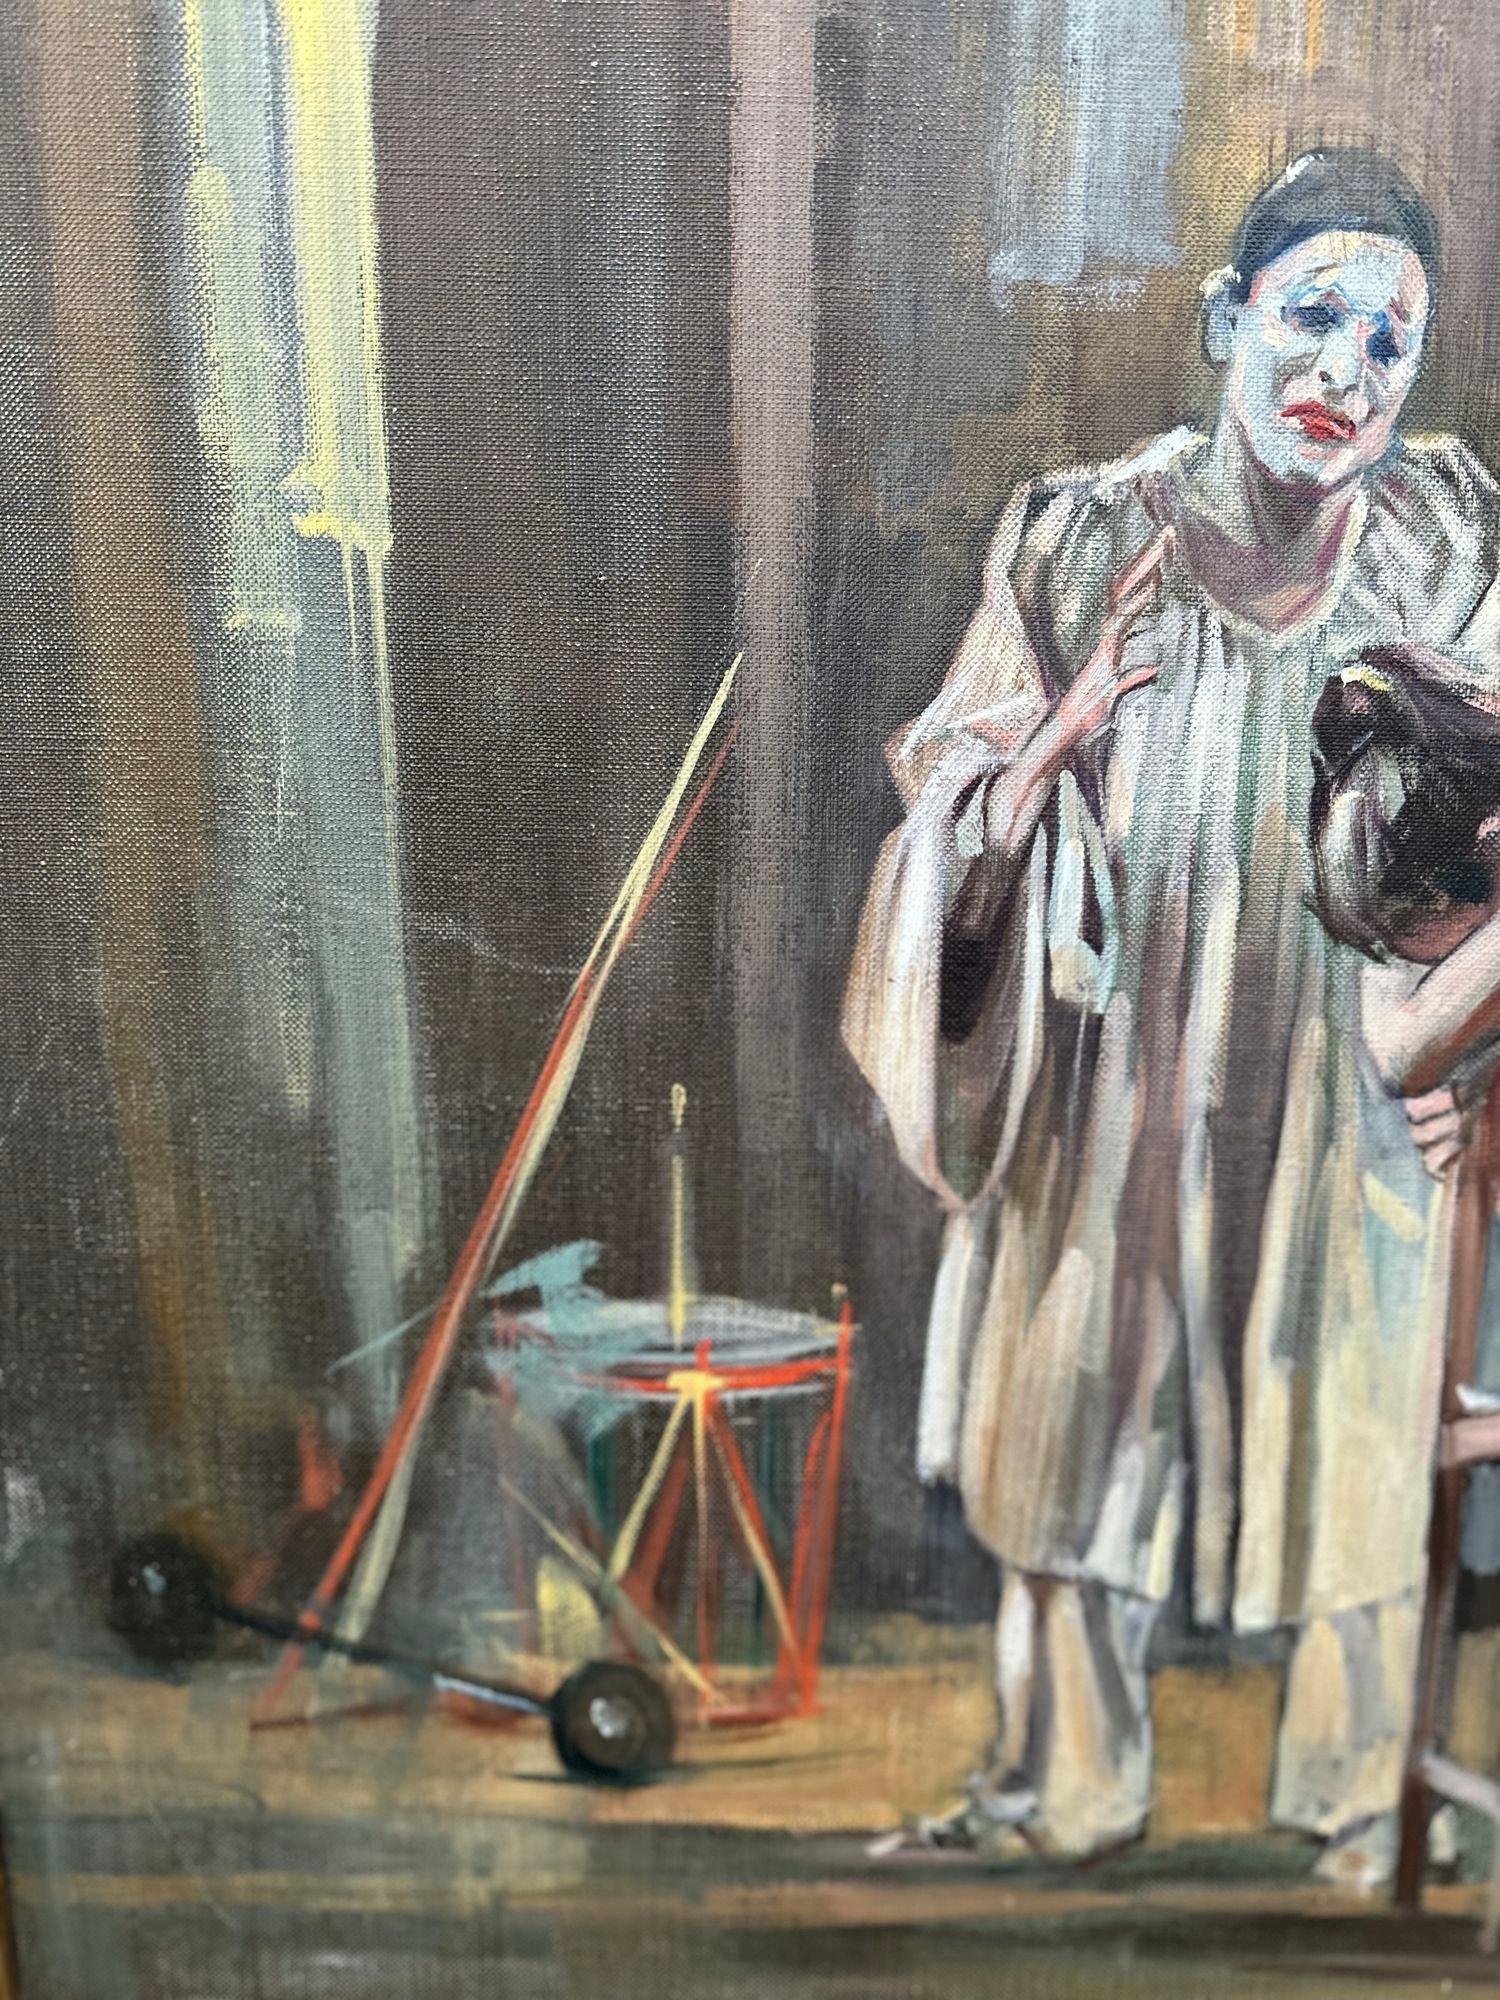 Vintage Italian painting by Giordano Giovanetti depicting at the heart of the painting a poignant scene: a distraught ballerina sitting while being consoled by who appears to be a mime or clown.
His rugged features and gentle expression convey an